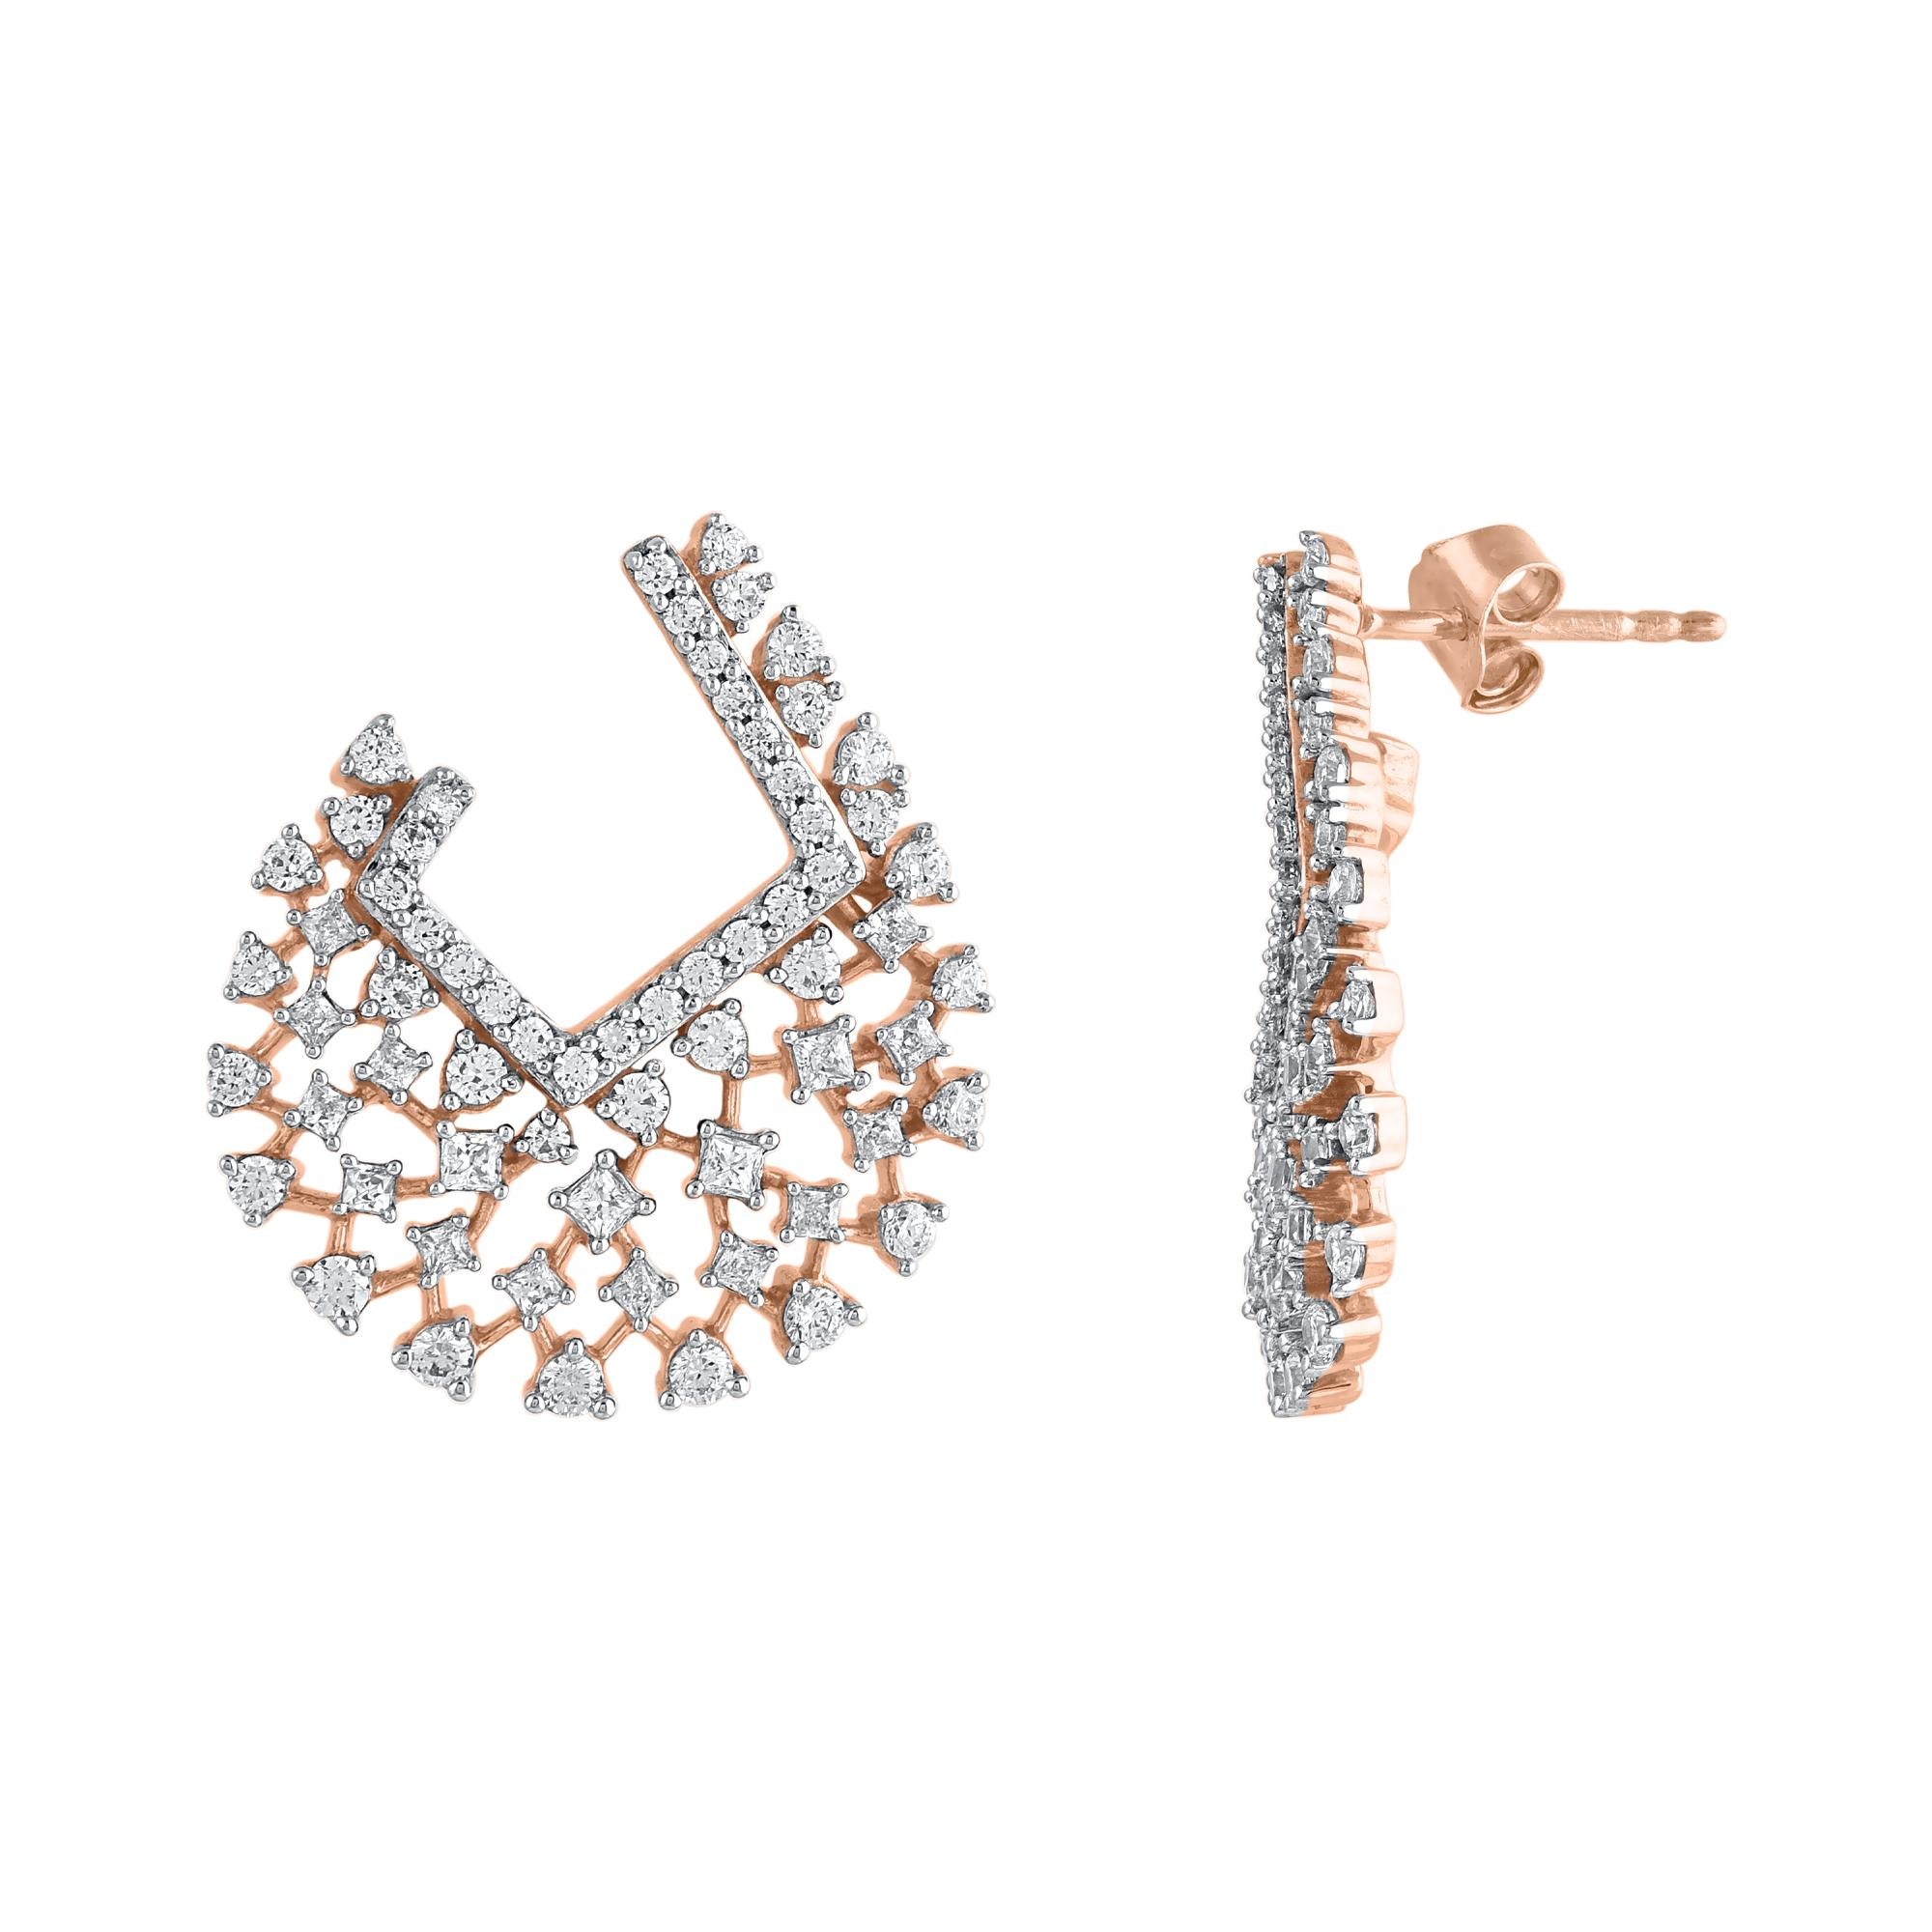 These shimmering and striking diamond stud earrings are perfect for yourself or for gifting to someone special. 
Crafted in 14 Karat Gold, earring is filled with 130 brilliant cut diamonds and princess cut diamond set in prong setting and shimmers